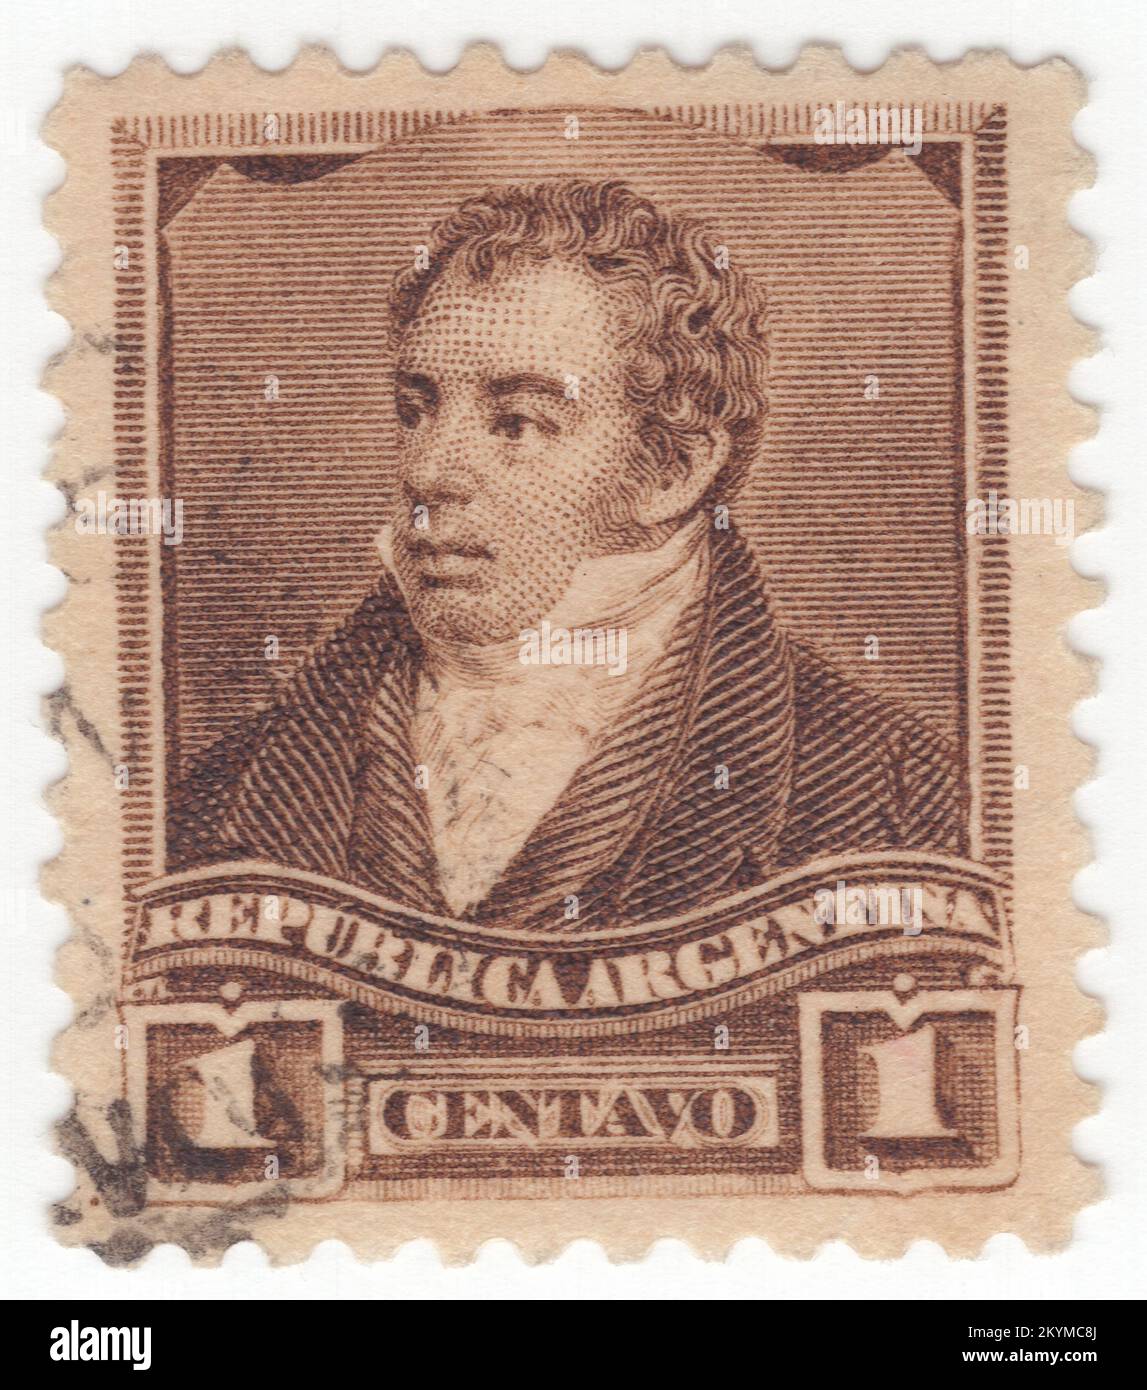 ARGENTINA - 1892: 1 centavo brown postage stamp depicting portrait of Bernardino de la Trinidad Gonzalez Rivadavia, first President of Argentina, then called the United Provinces of the Río de la Plata, from February 8, 1826 to June 27, 1827. He was educated at the Royal College of San Carlos, but left without finishing his studies. During the British Invasions he served as Third Lieutenant of the Galicia Volunteers. He participated in the open Cabildo on May 22, 1810 voting for the deposition of the viceroy. He had a strong influence on the First Triumvirate Stock Photo